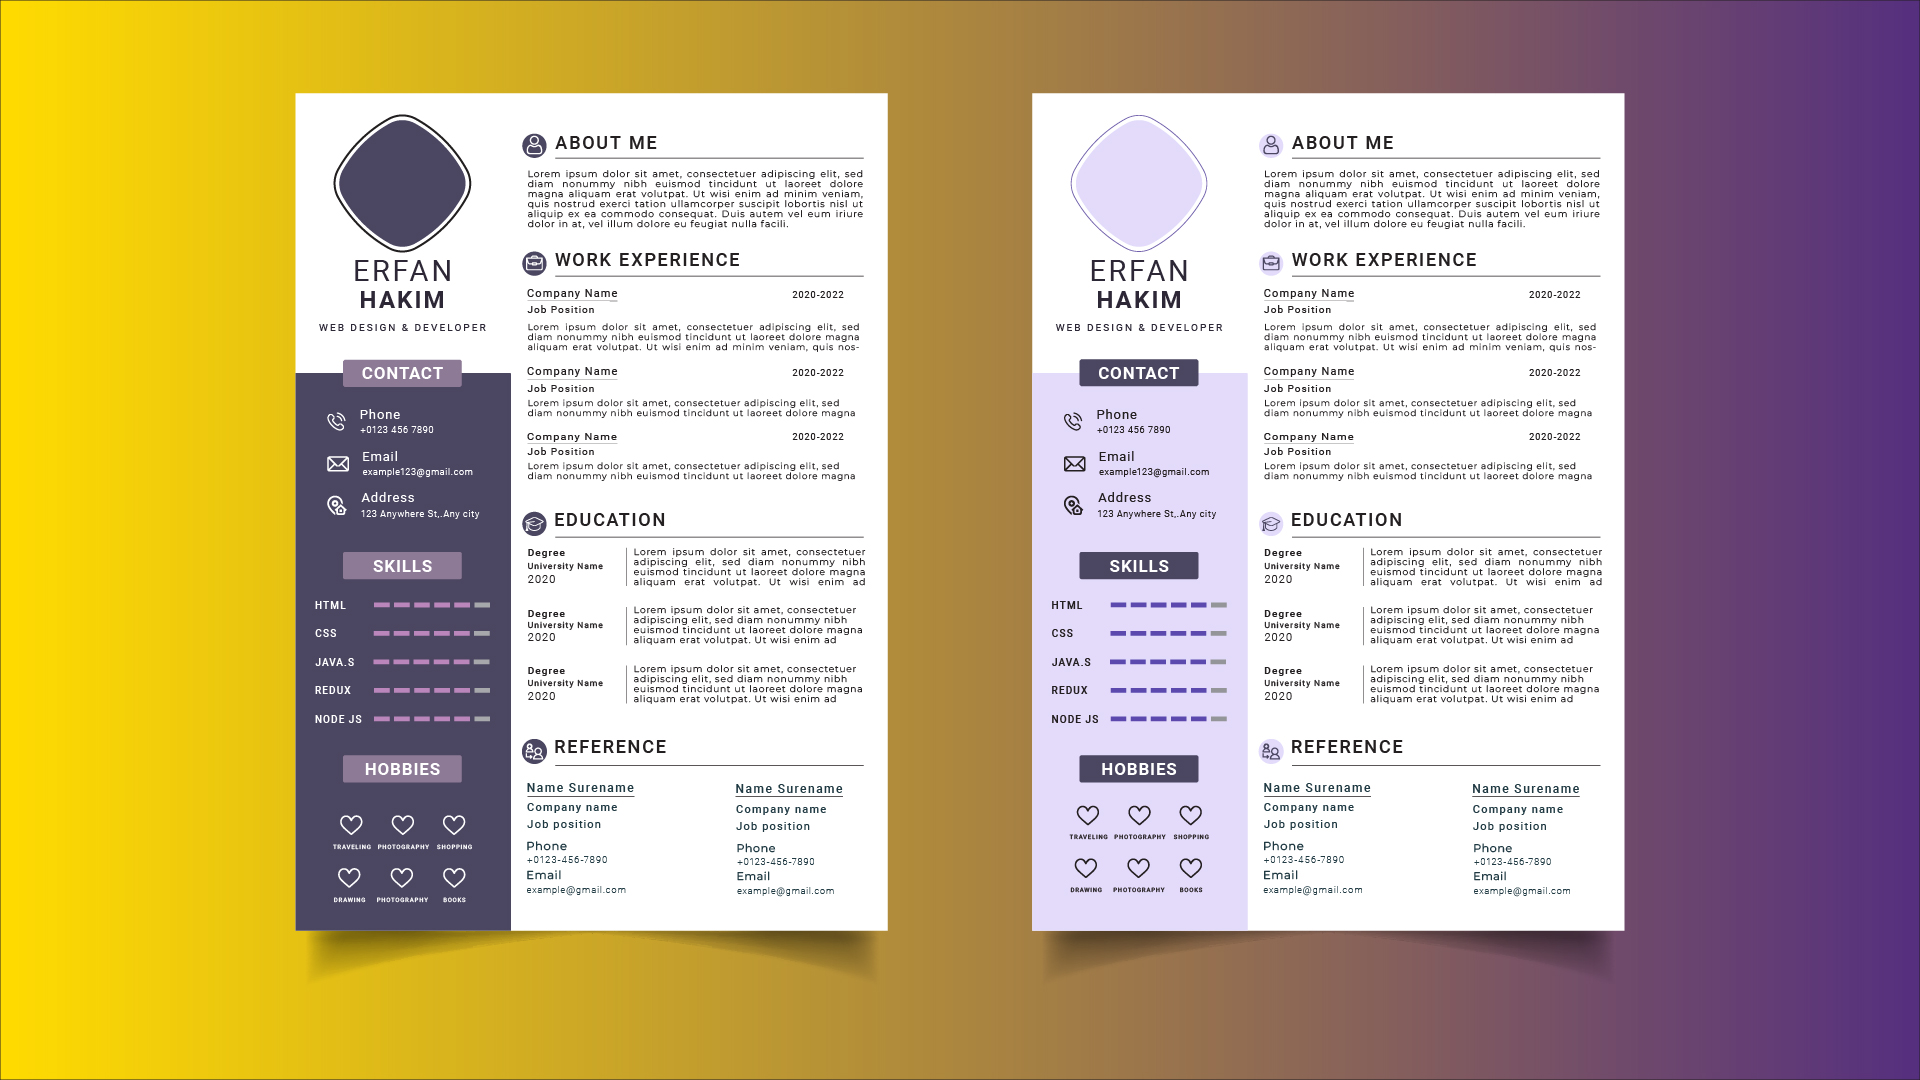 Two pages of a resume on a yellow and purple background.